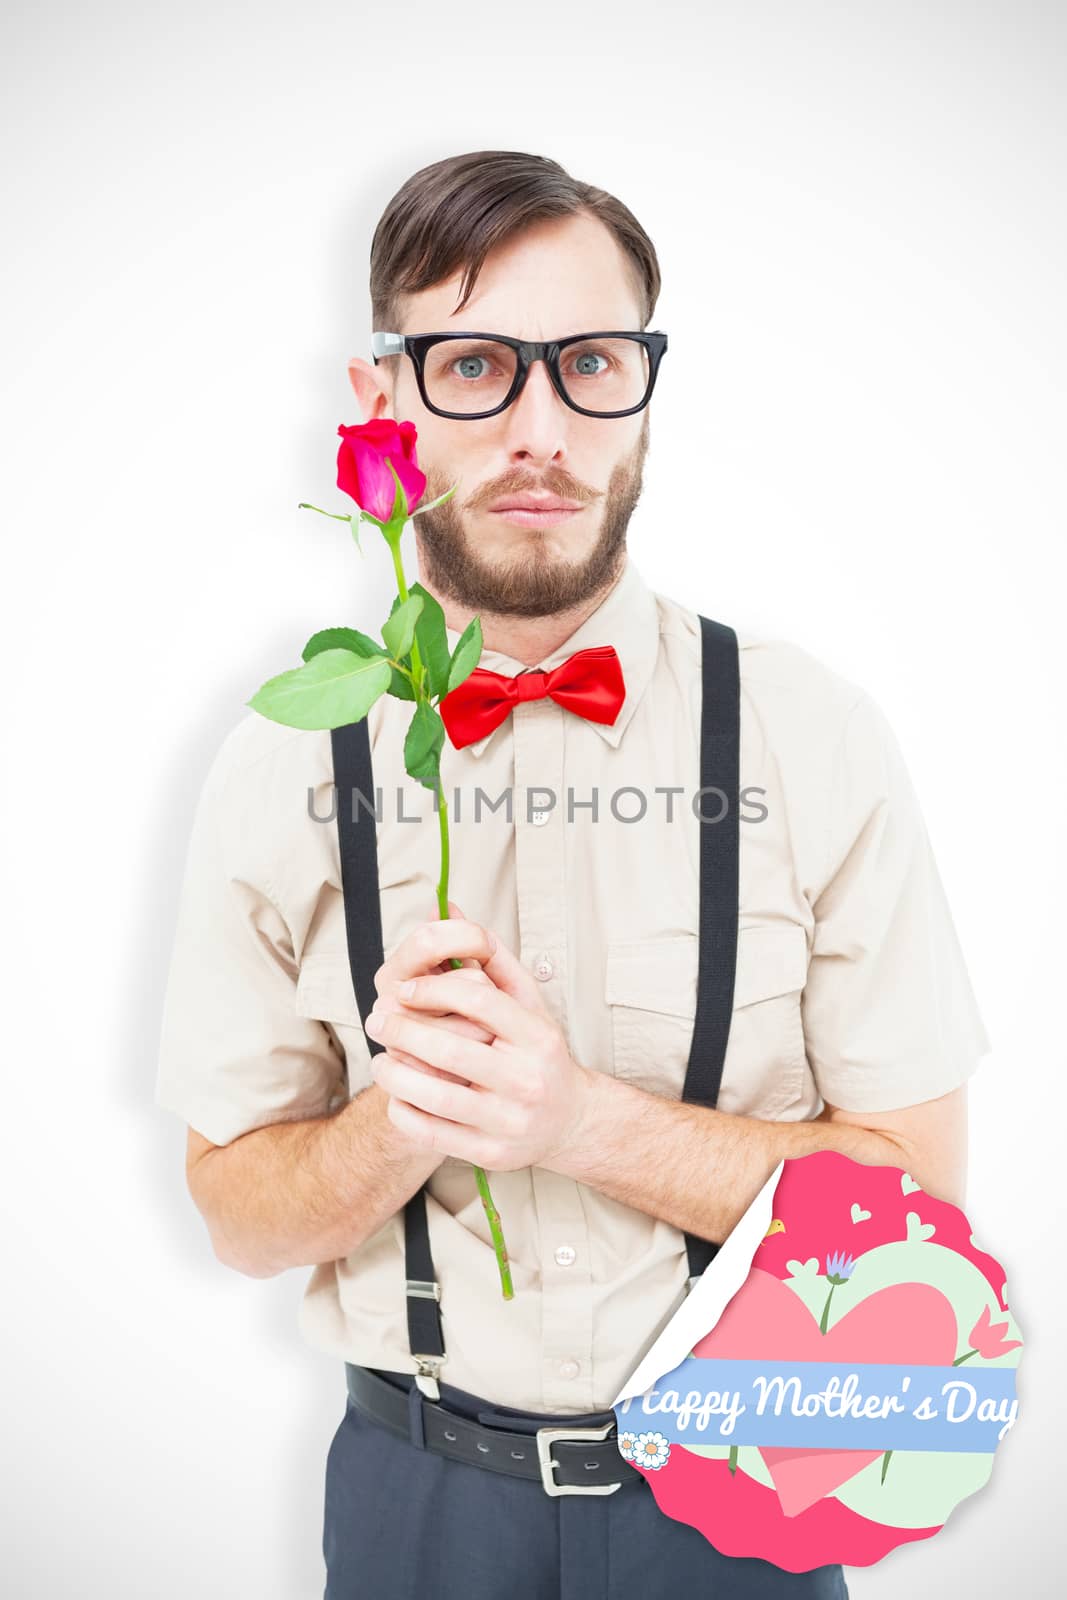 Geeky hipster offering a rose against mothers day greeting